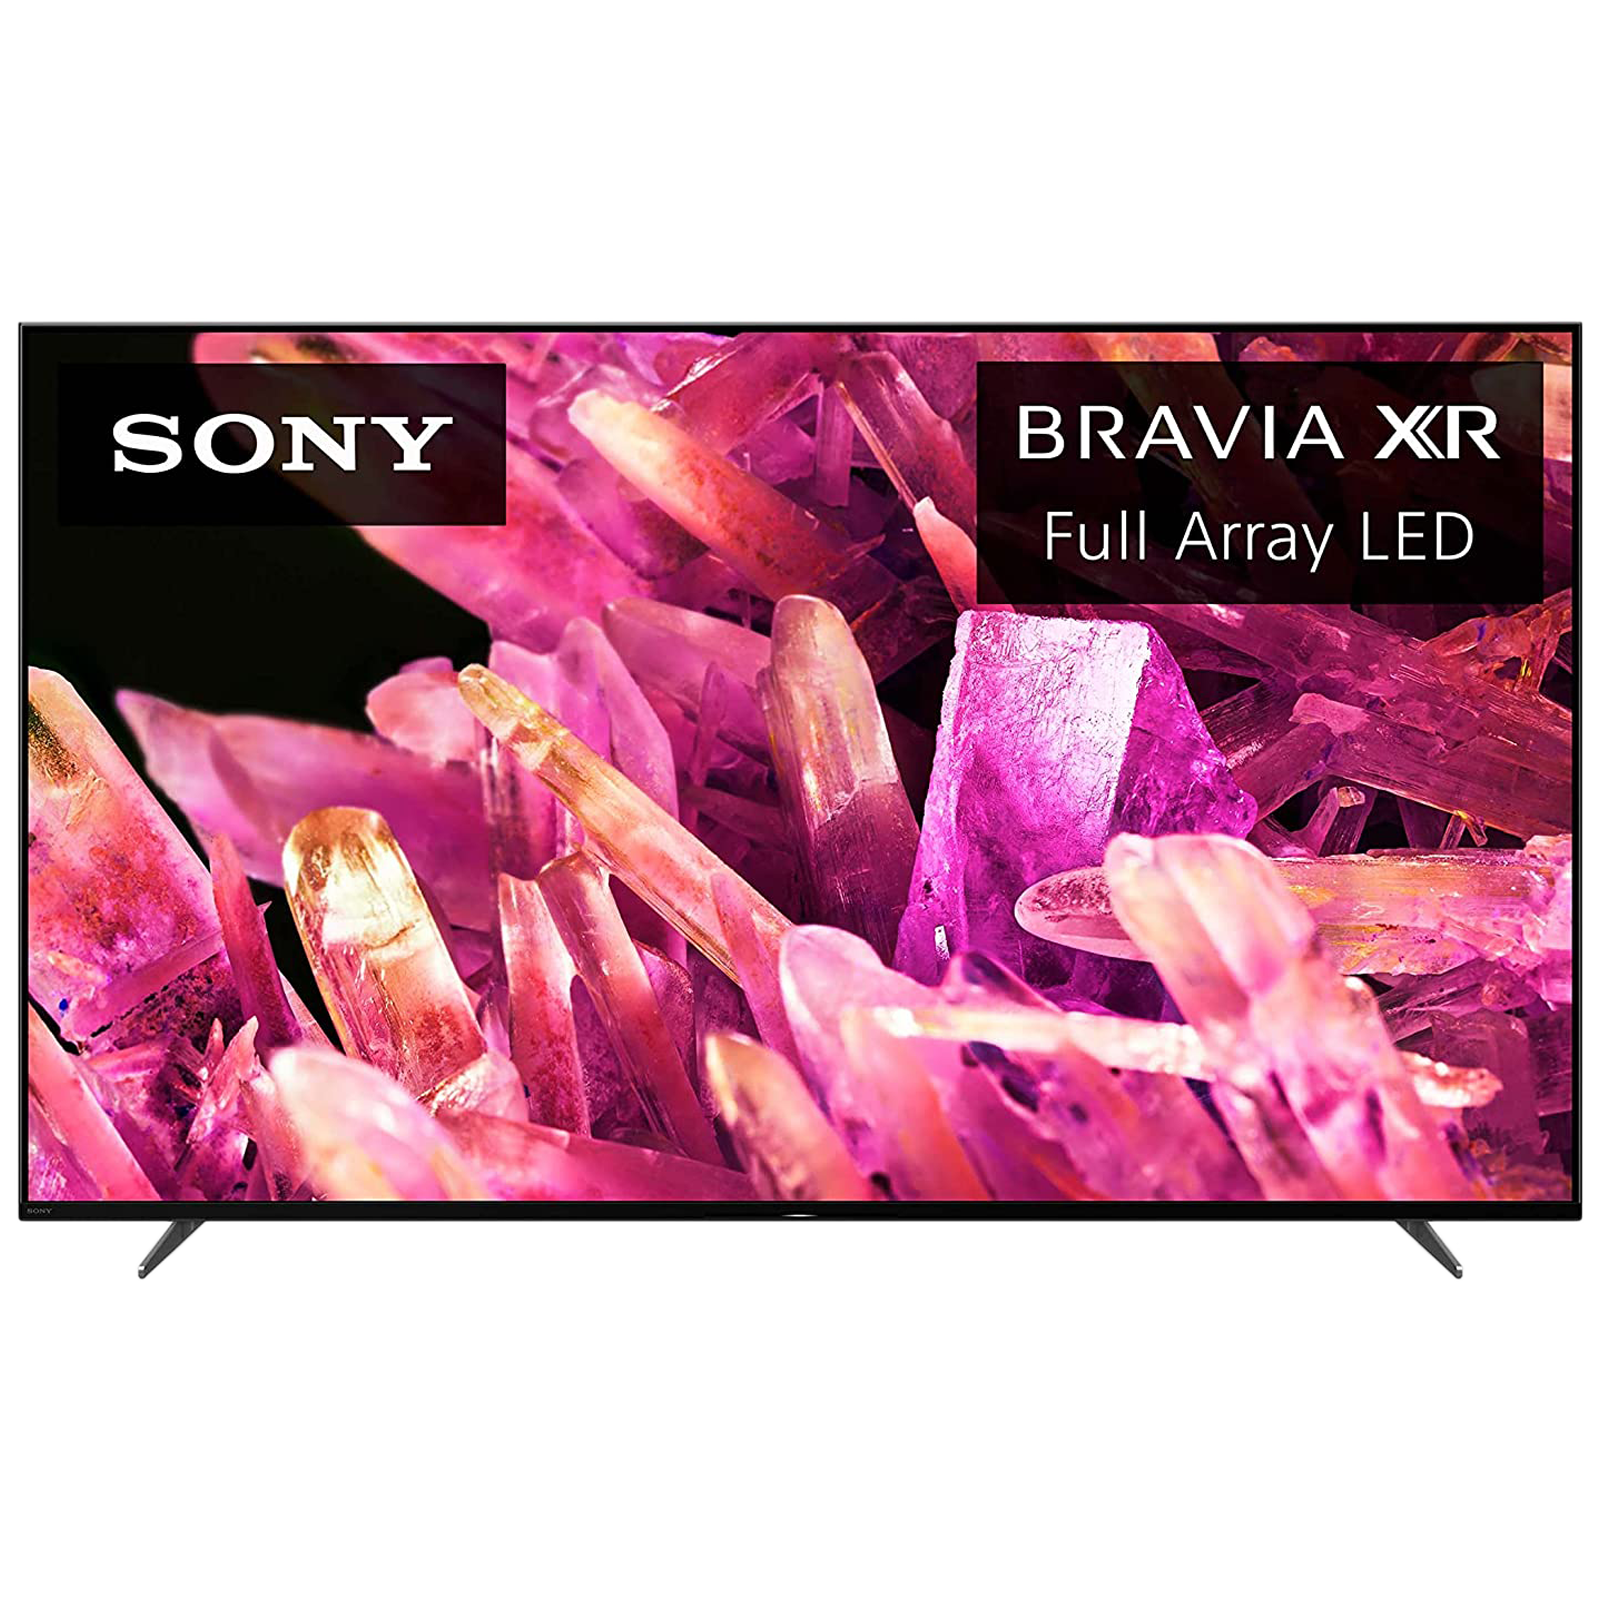 SONY 138.8cm (55 Inch) Ultra HD 4K LED Smart TV (Full Array LED with XR Contrast Booster and Dolby Atmos, XR-55X90K, Black)_1